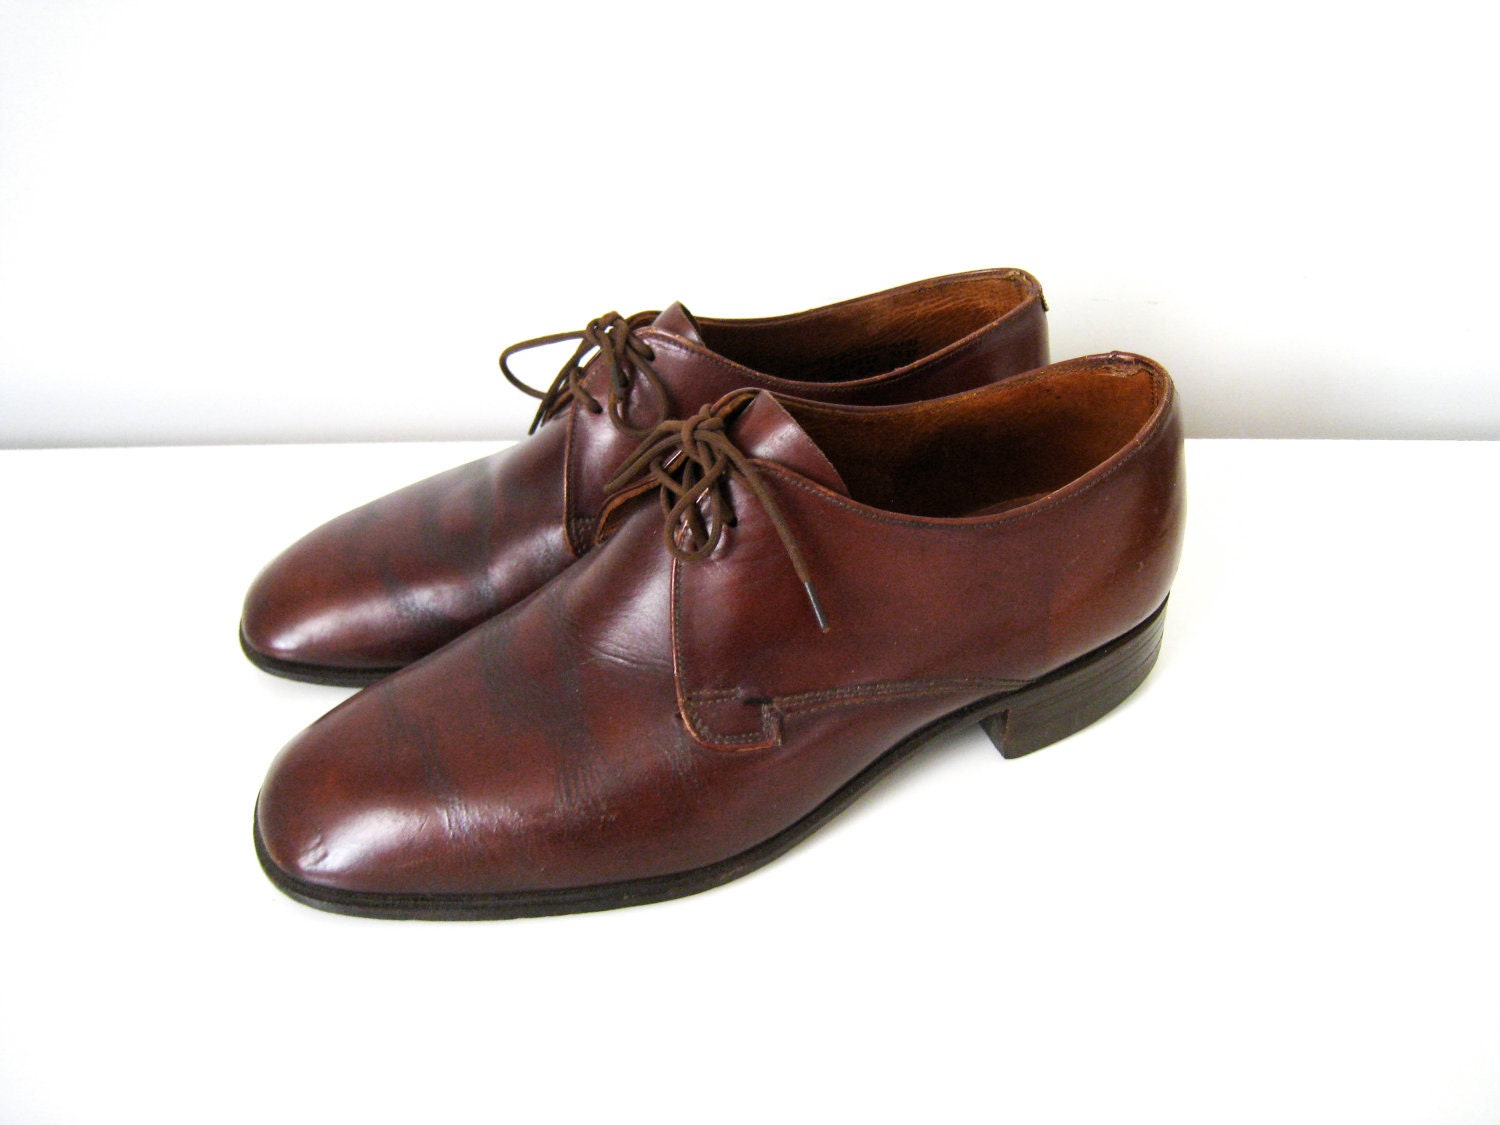 Vintage Mens Oxford Shoes in Brown Leather by CutandChicVintage